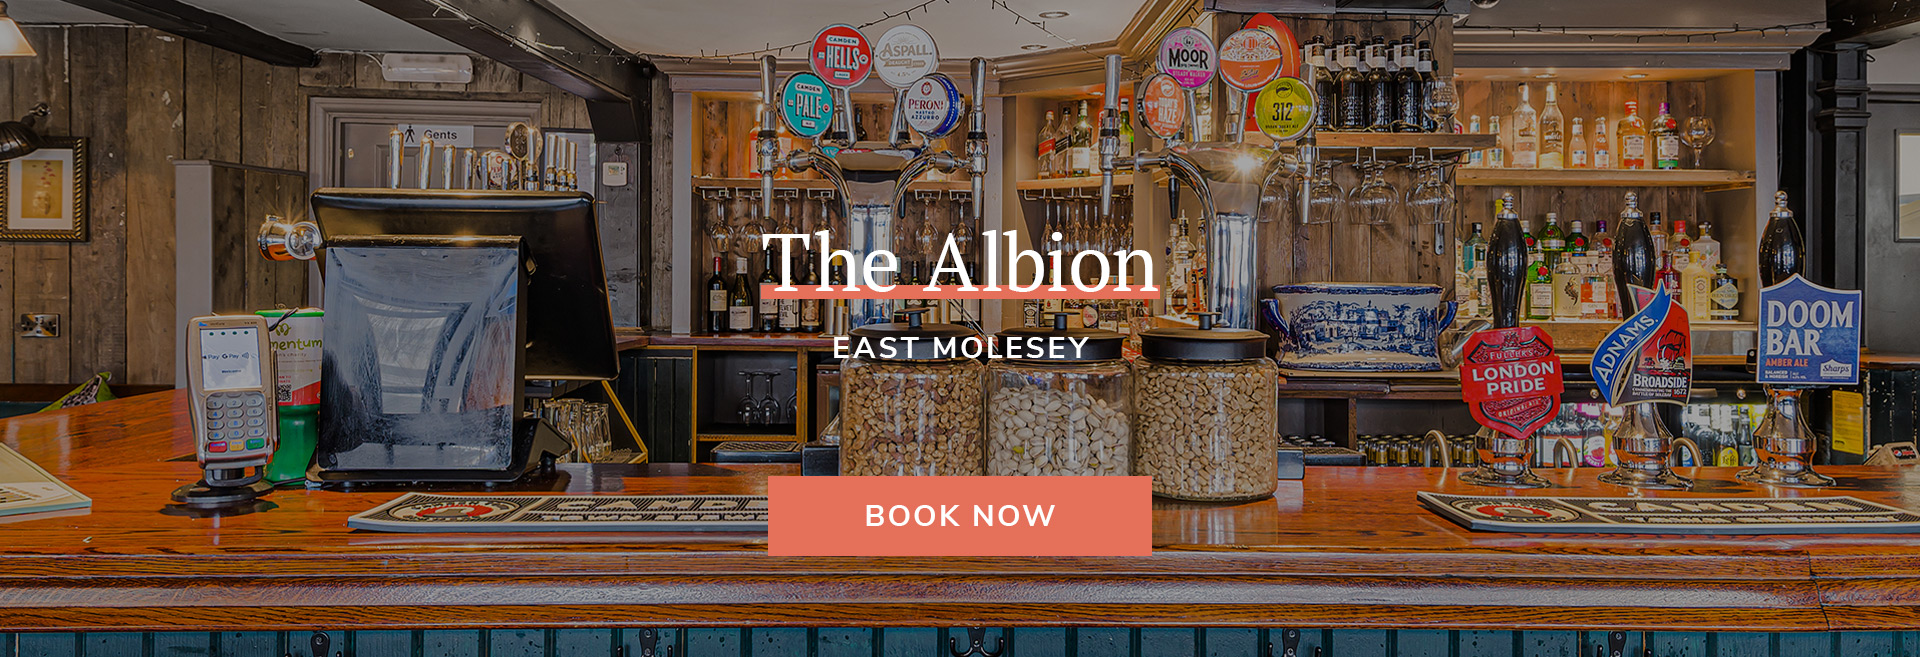 The Albion Hotel Banner 2